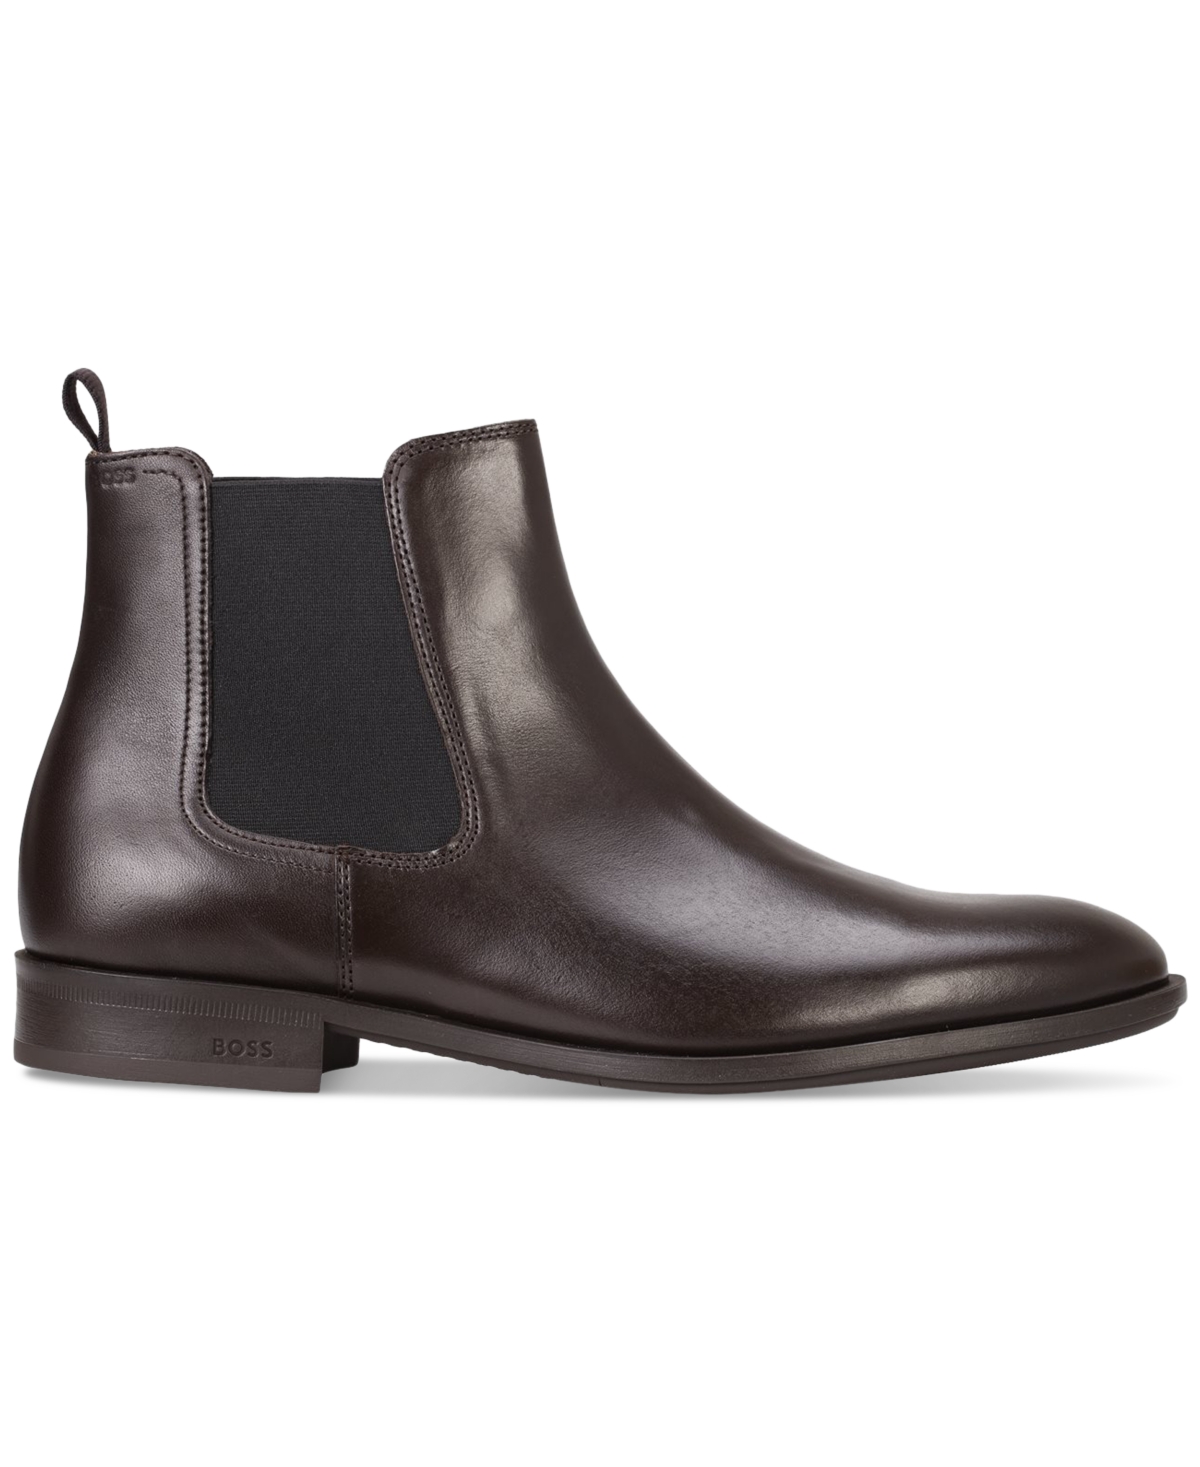 HUGO BOSS MEN'S COLBY CHEB LEATHER CHELSEA BOOT